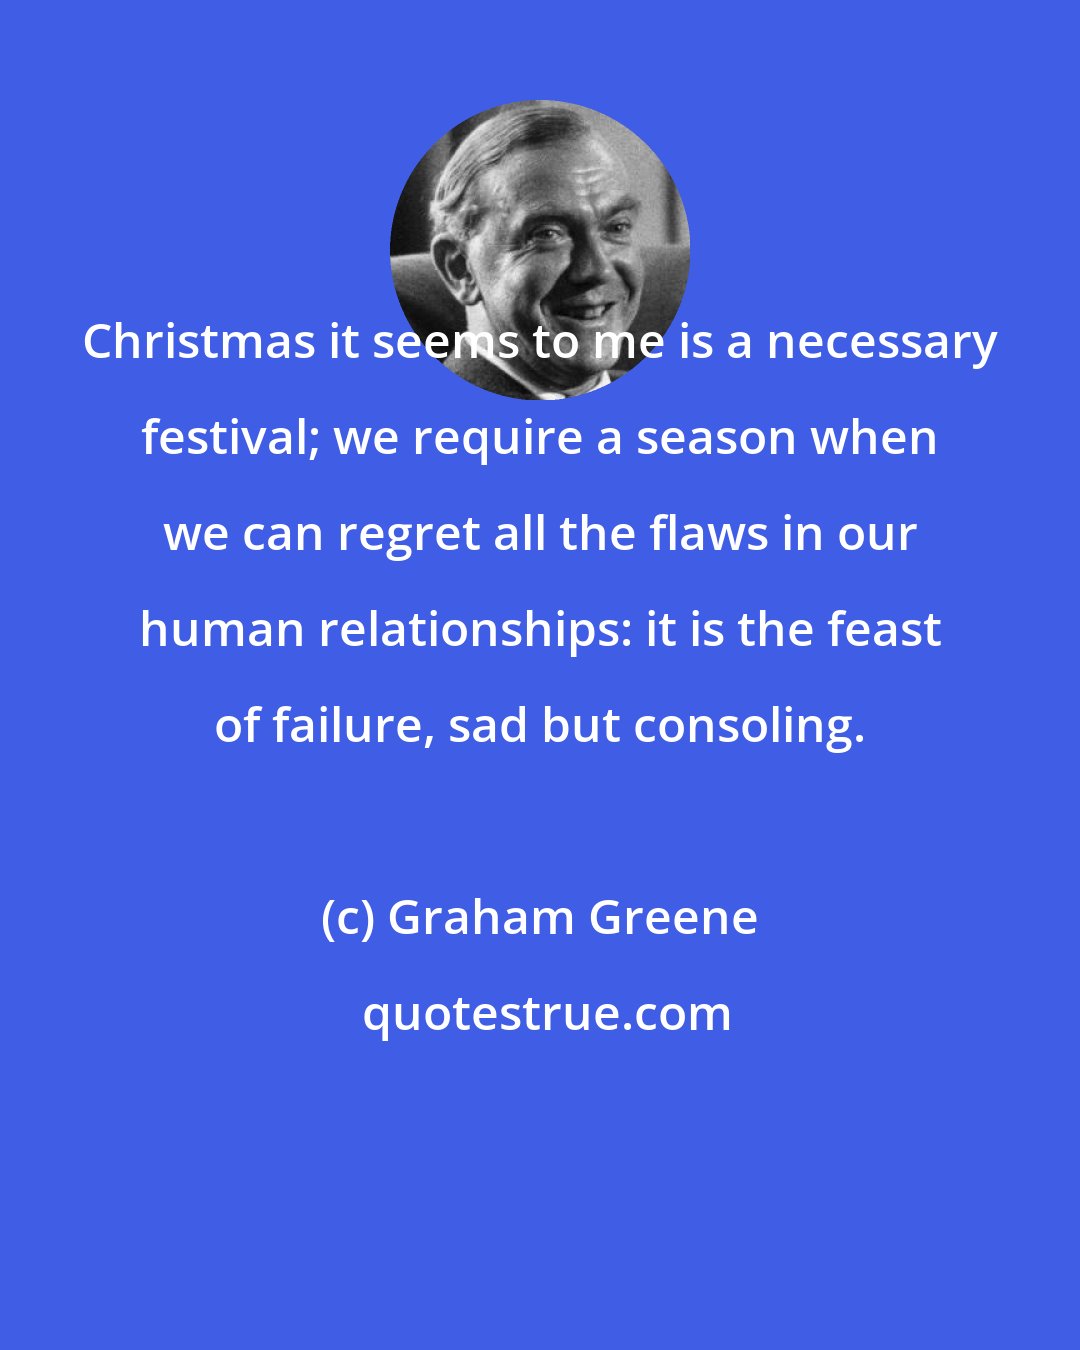 Graham Greene: Christmas it seems to me is a necessary festival; we require a season when we can regret all the flaws in our human relationships: it is the feast of failure, sad but consoling.